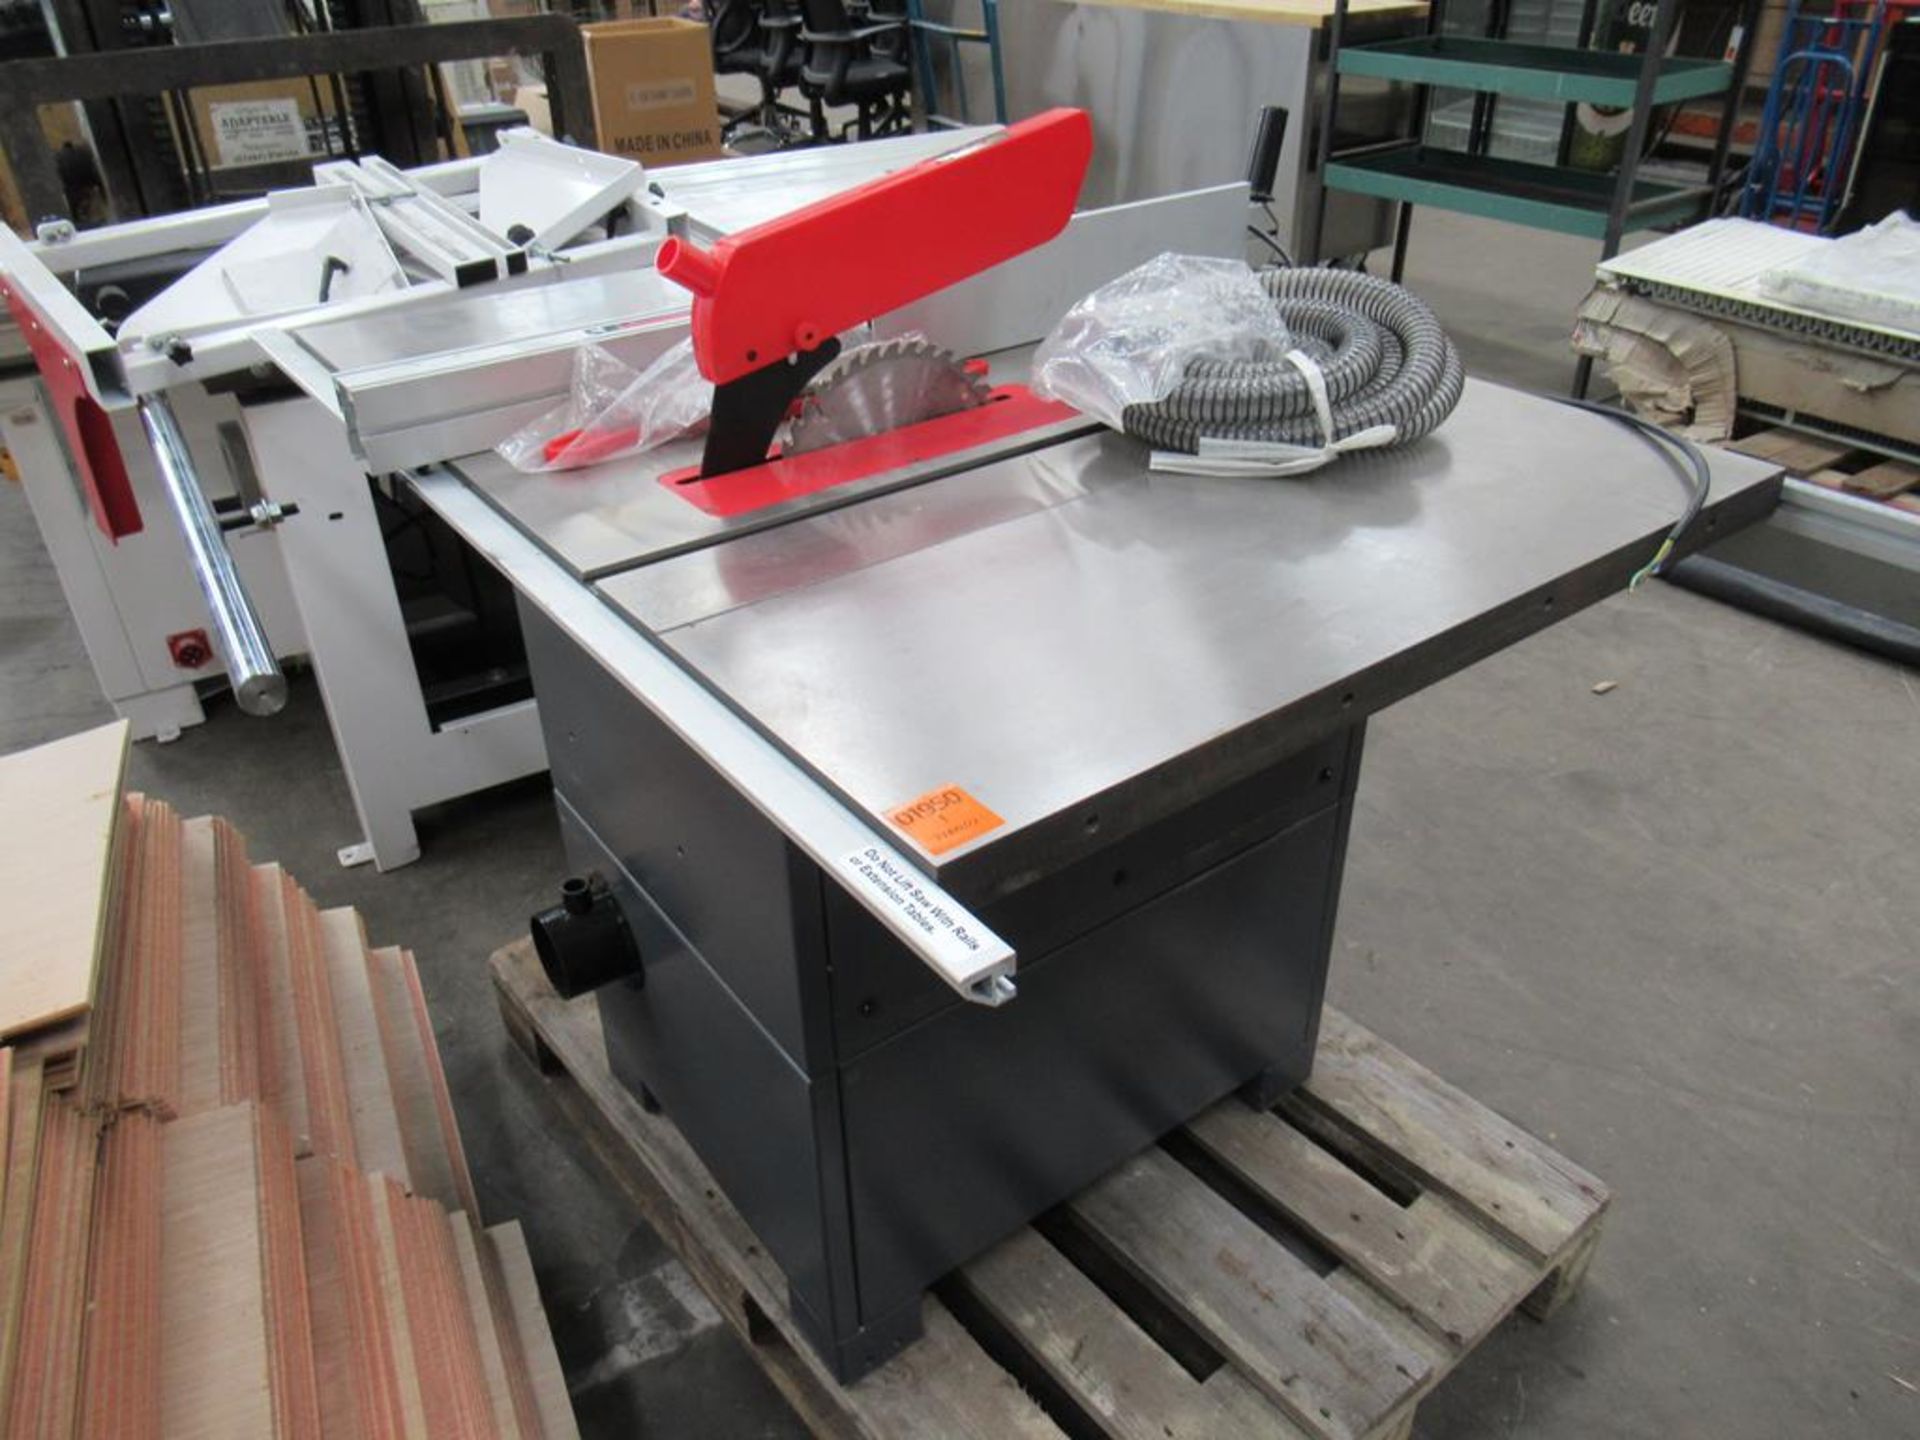 iTech 10" table saw model ITWM01332, 240V - Image 5 of 5